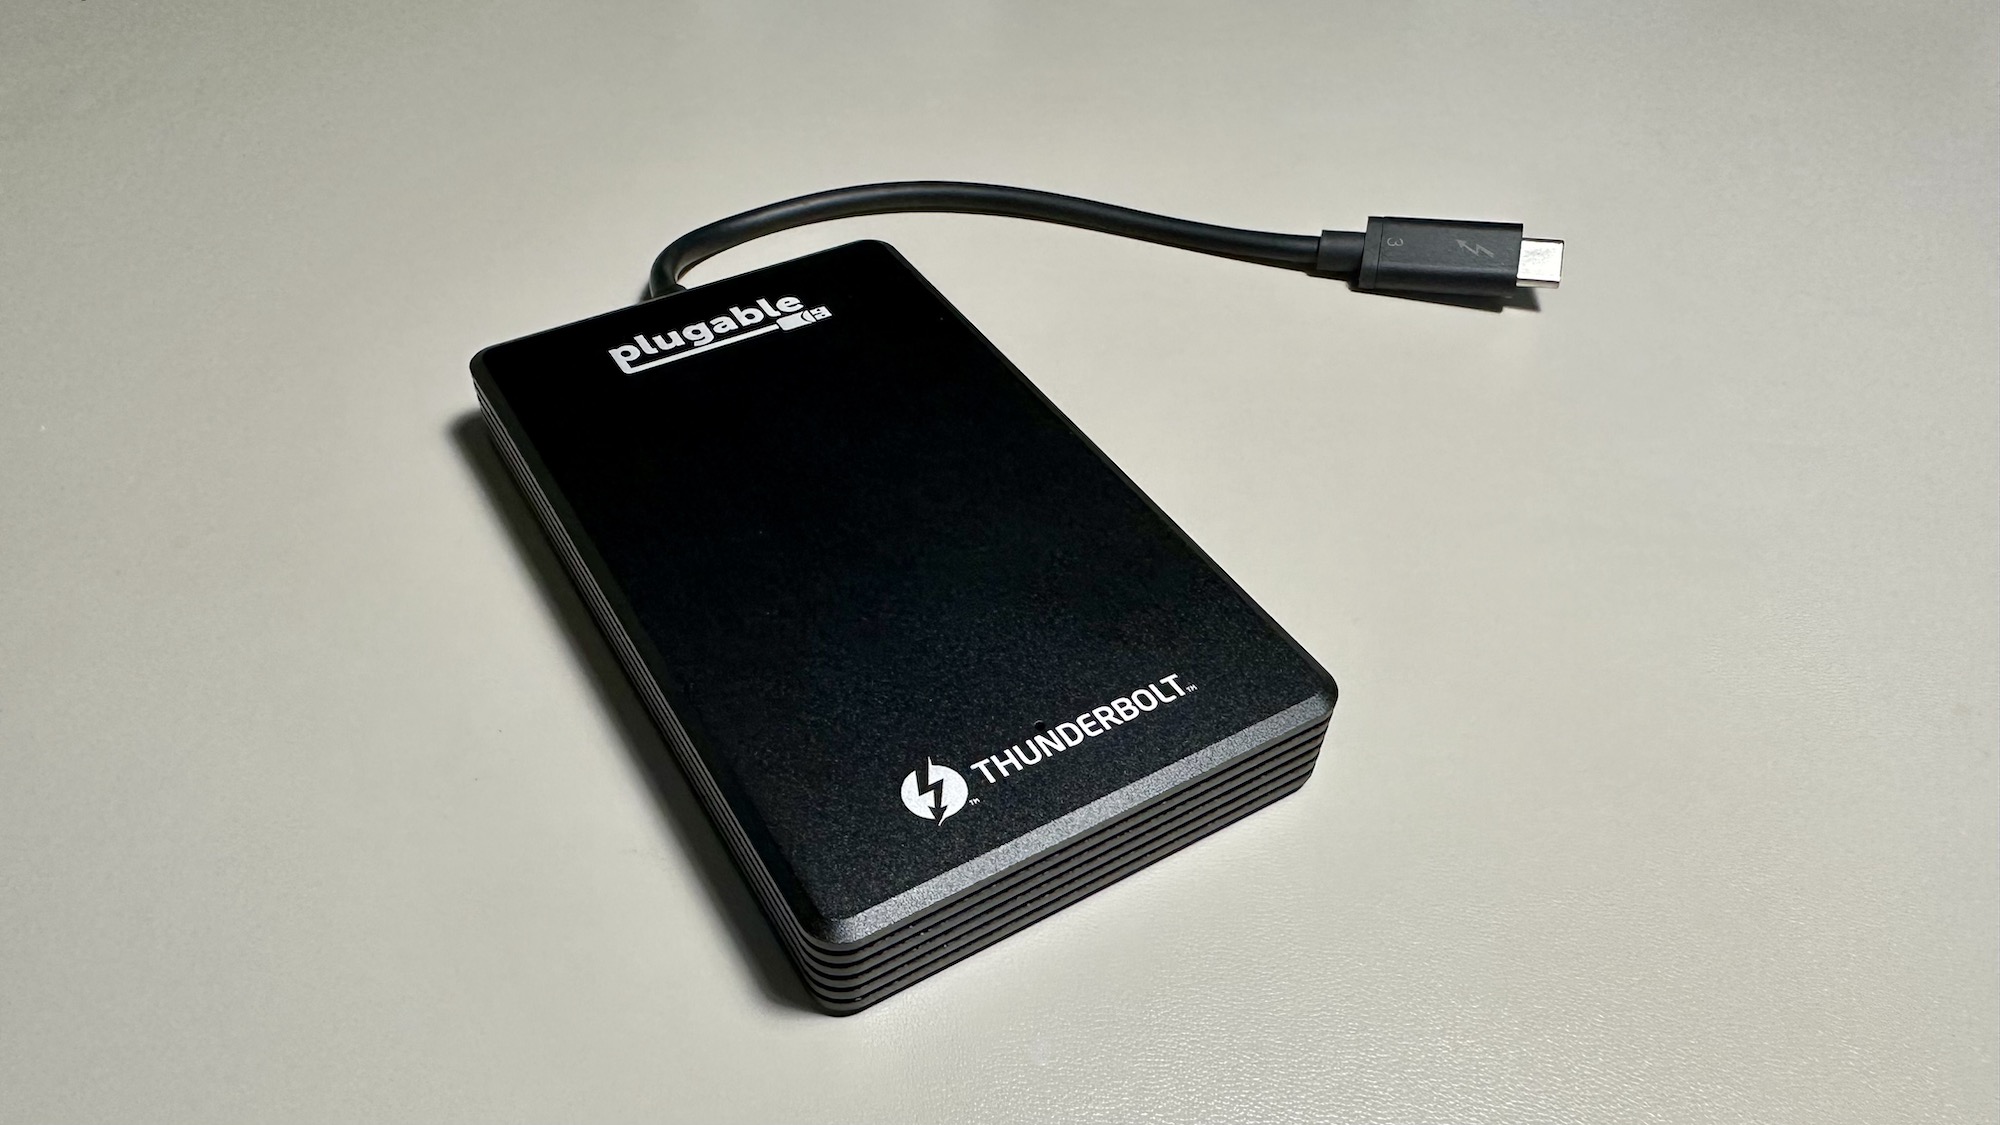 Review: Plugable's 2TB Thunderbolt SSD Offers Ultra Fast Transfer Speeds